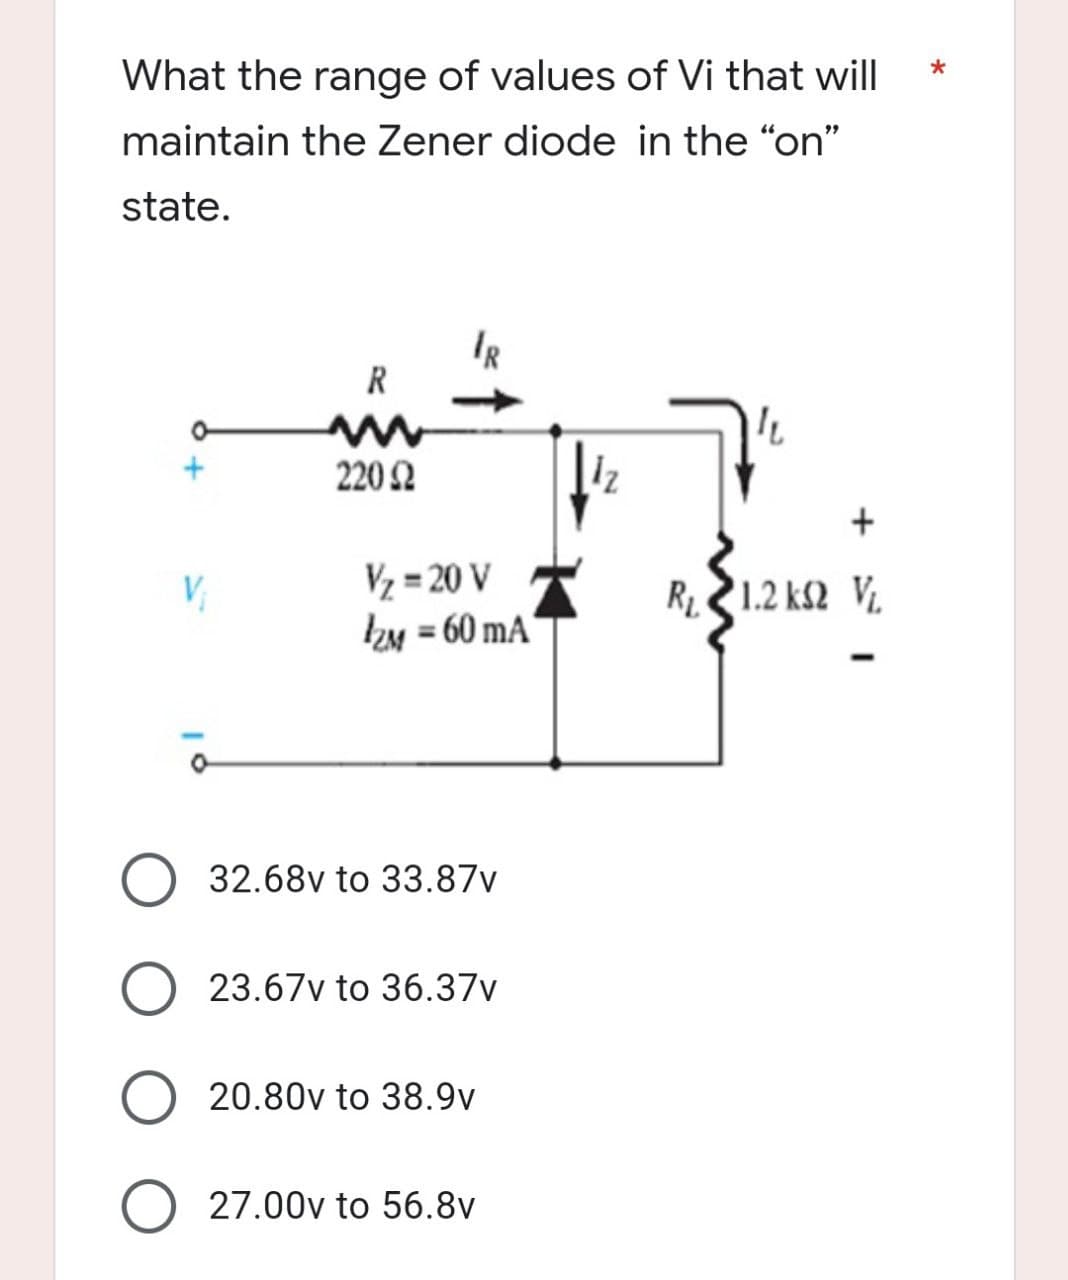 *
What the range of values of Vi that will
maintain the Zener diode in the "on"
state.
IR
R
IL
220 2
R, 21.2 ΚΩ V
V₁
V₂ = 20 V
IzM=60 mA
32.68v to 33.87v
O 23.67v to 36.37v
20.80v to 38.9v
O 27.00v to 56.8v
1₂
+=